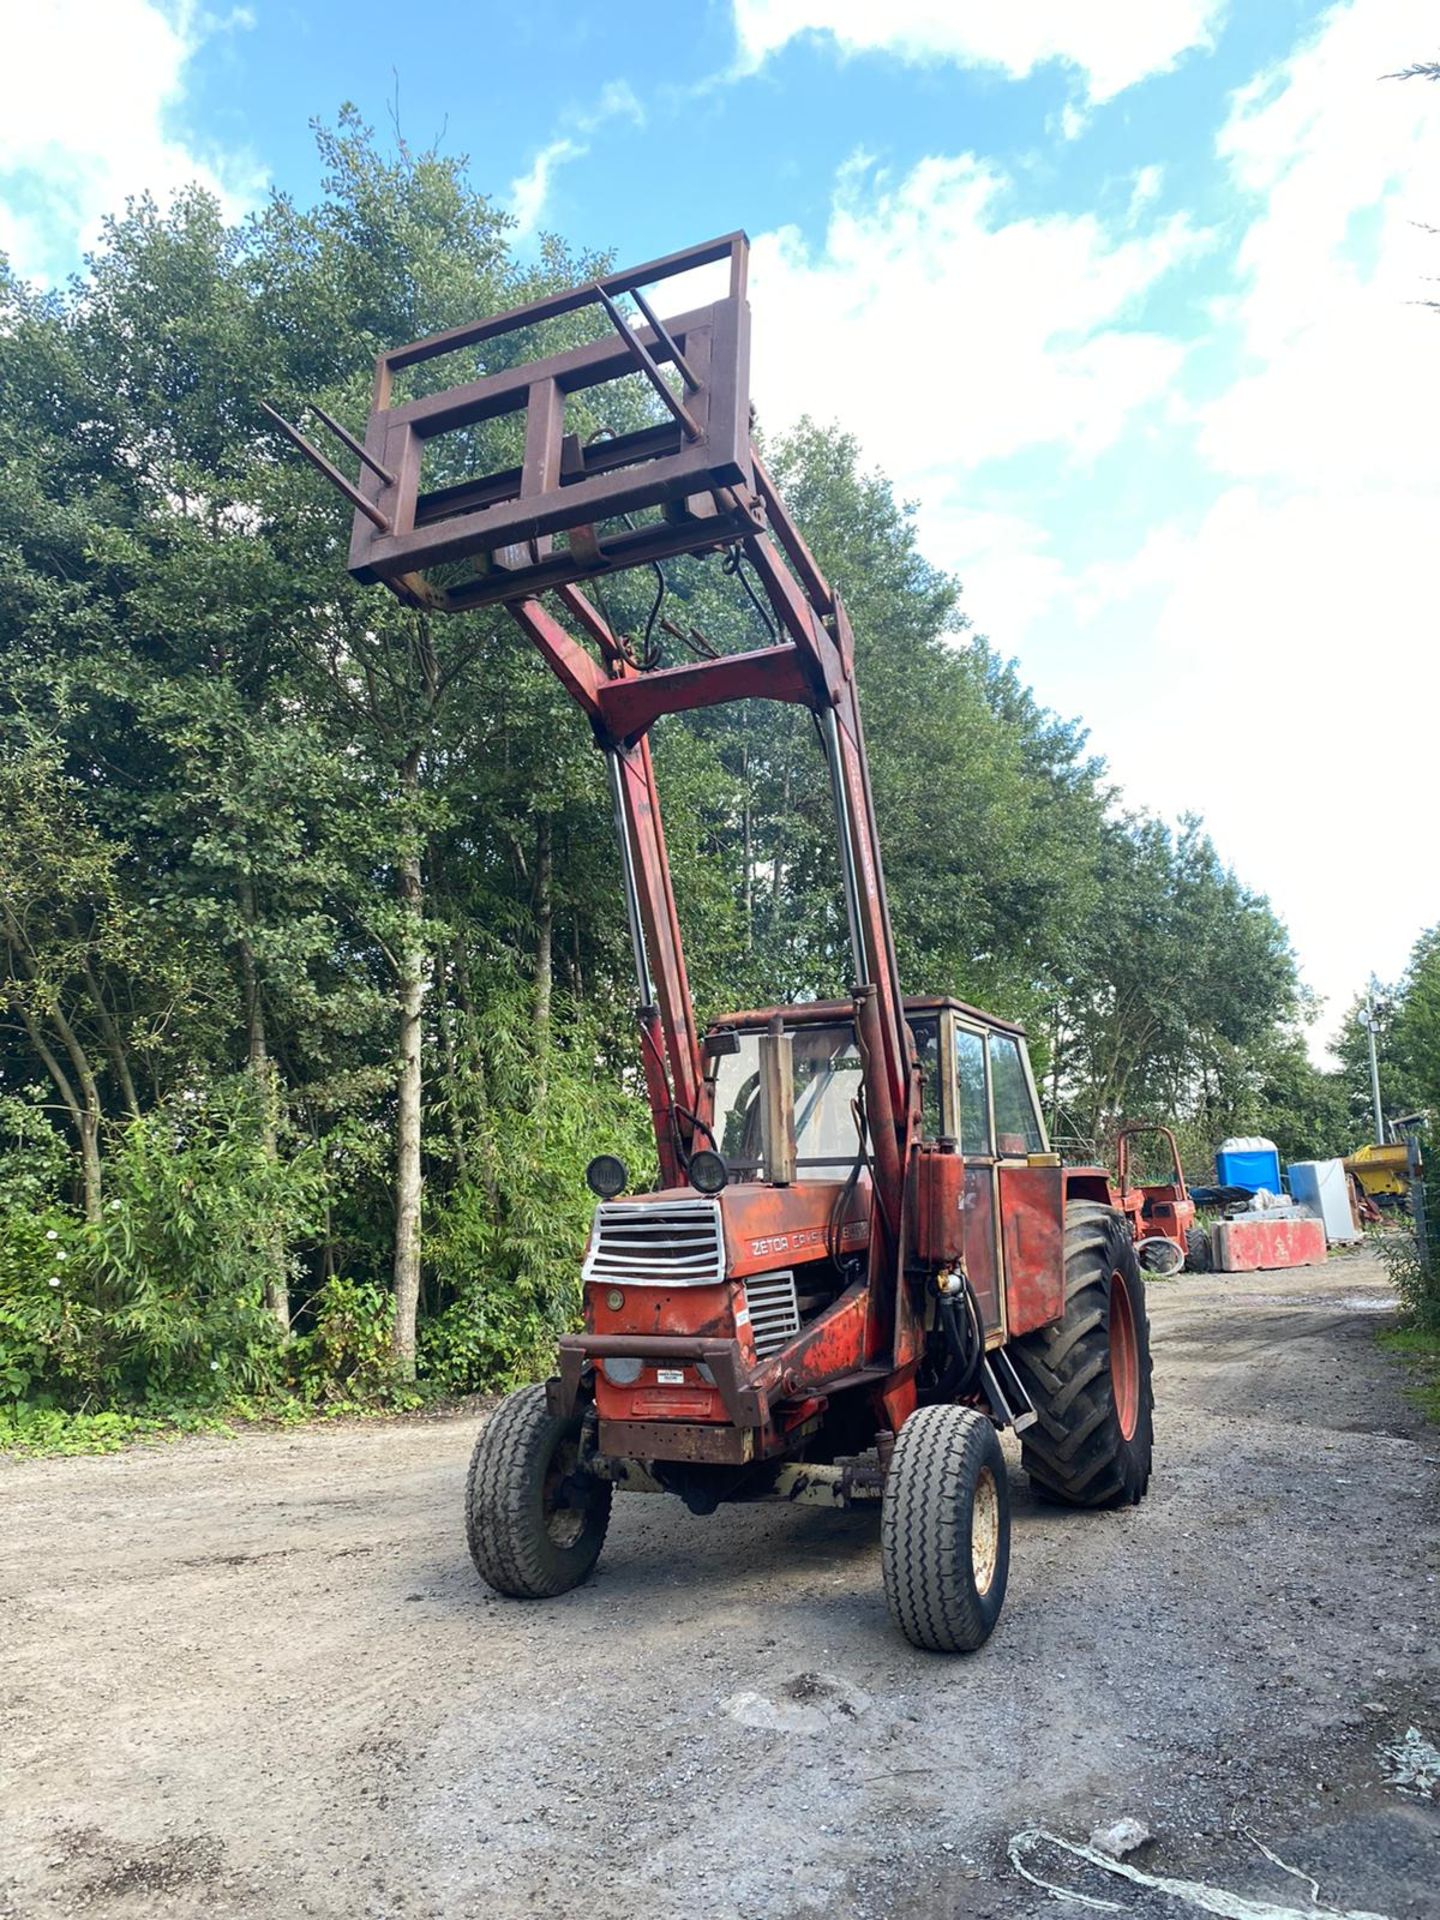 ZETOR CRYSTAL 8011 LOADER TRACTOR, RUNS, WORKS AND LIFTS, IN GOOD CONDITION *PLUS VAT* - Image 4 of 6